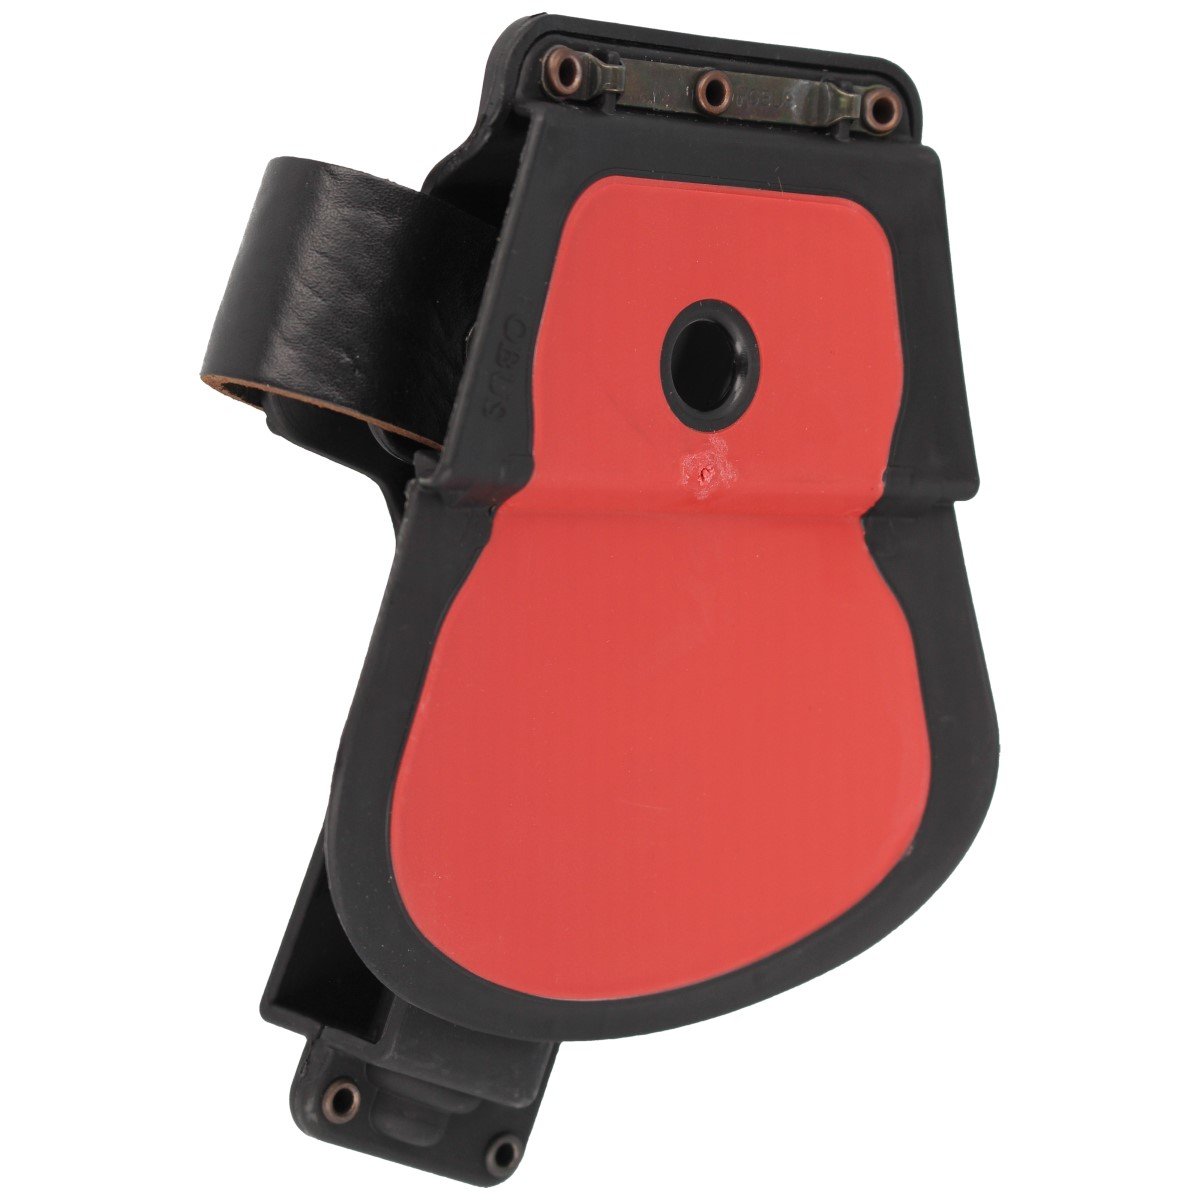 Fobus Tactical Paddle Holster - Glock 19/23/32